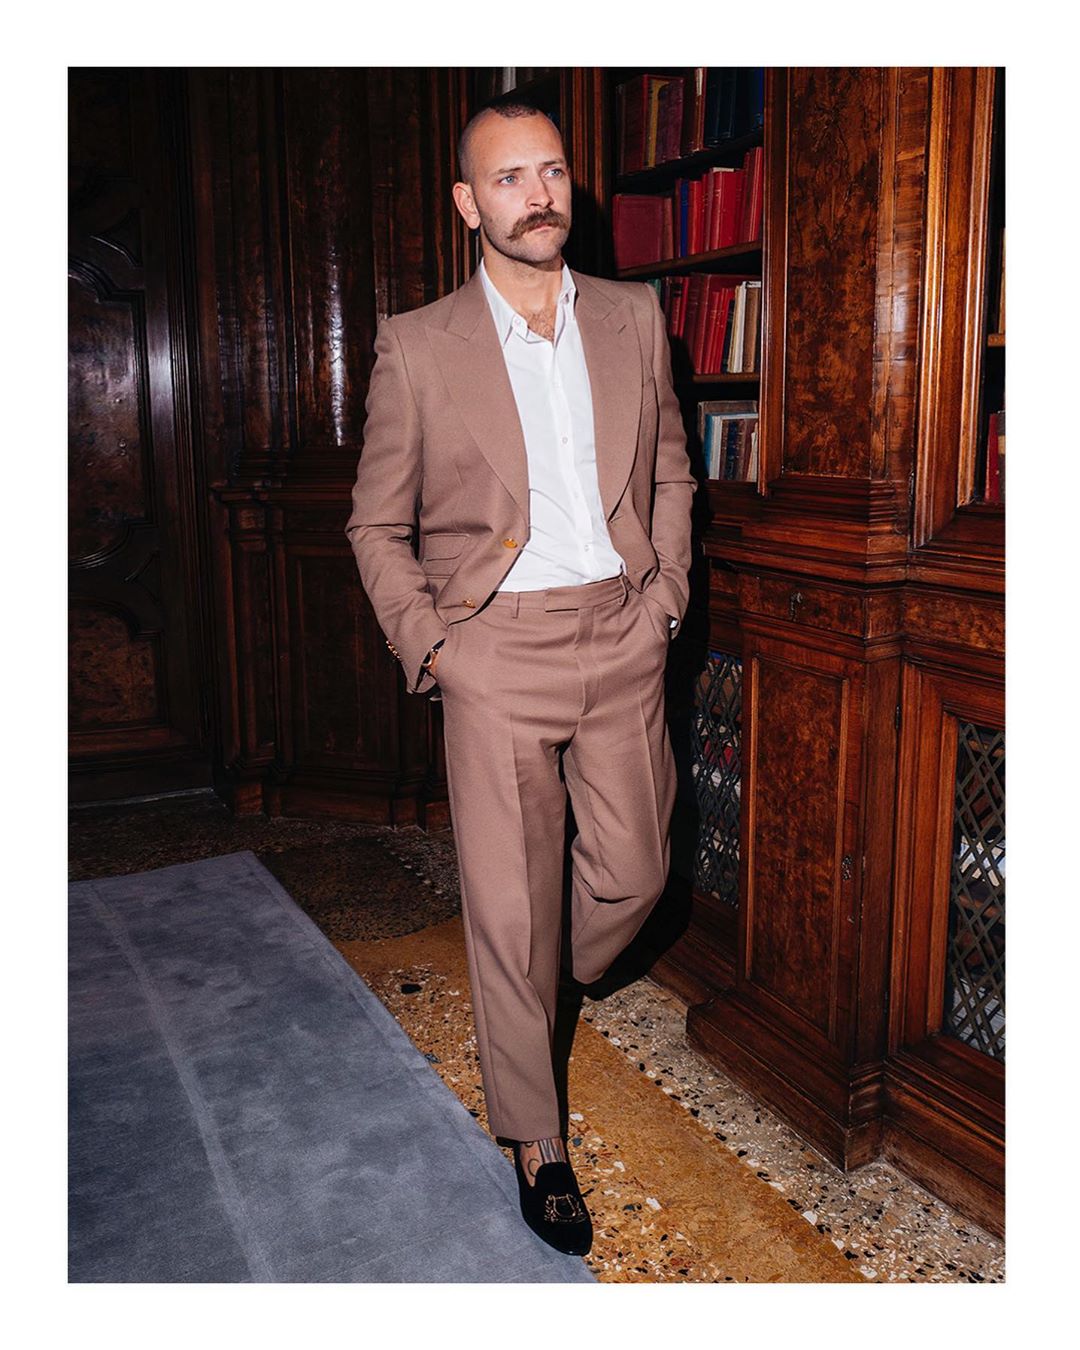 Gucci Official - Attending the @iconmagazine.it Venice Gala last night, @alessandro.borghi is captured by @germanlarkin in a #GucciSS20 two button peak lapel suit with gold buttons with a dress shirt...